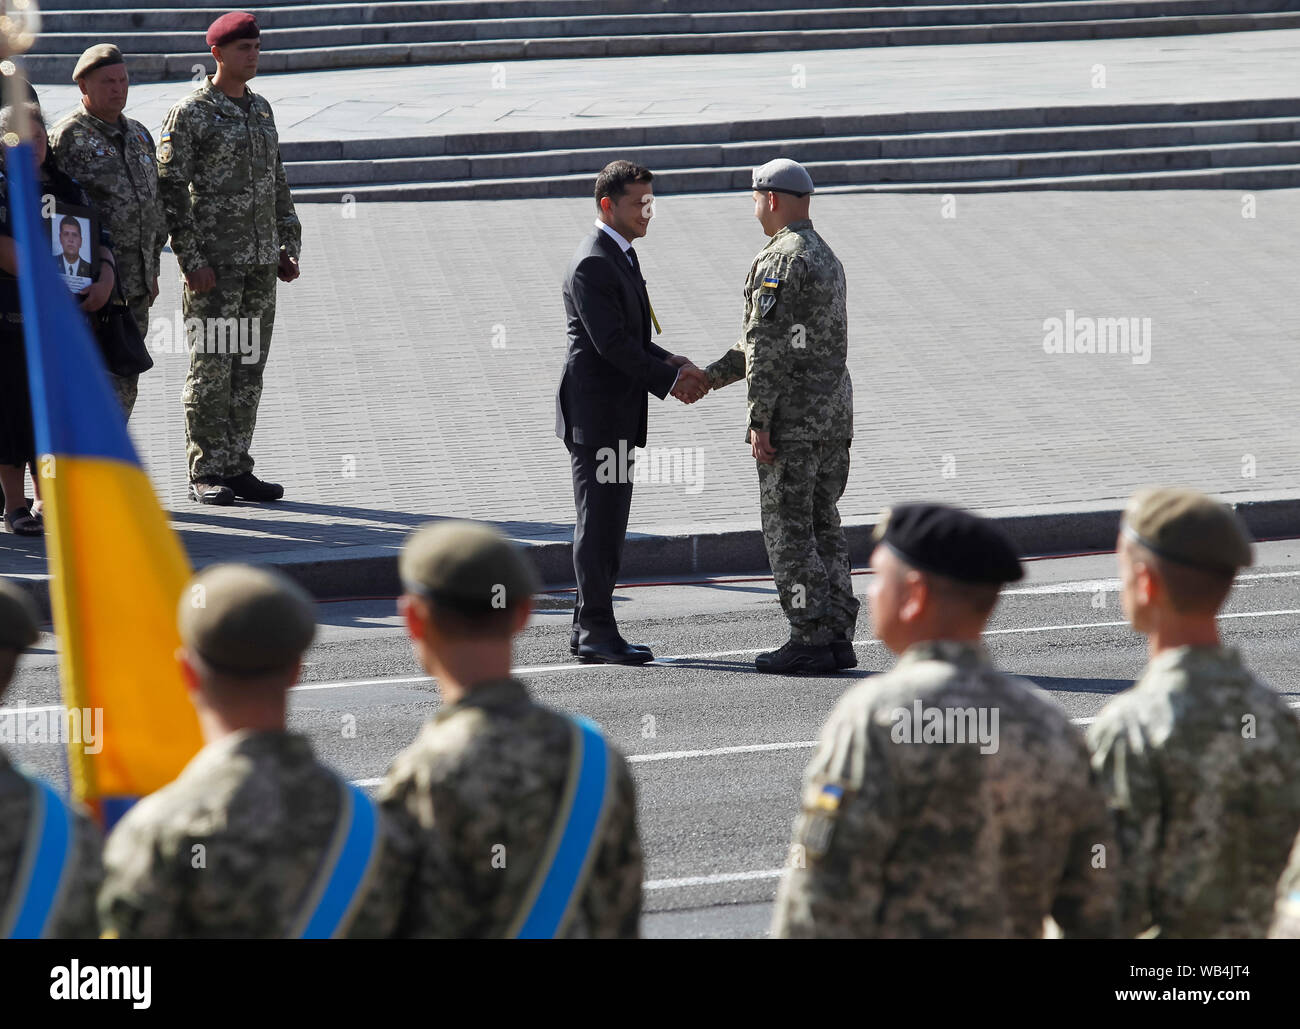 Ukrainian President Volodymyr Zelensky (C) hands over a state award to the Ukrainian servicemen during the 28th anniversary of Independence Day at the Independence Square in Kiev.Ukrainians mark the 28th anniversary of Ukraine's independence from the Soviet Union since 1991. Stock Photo